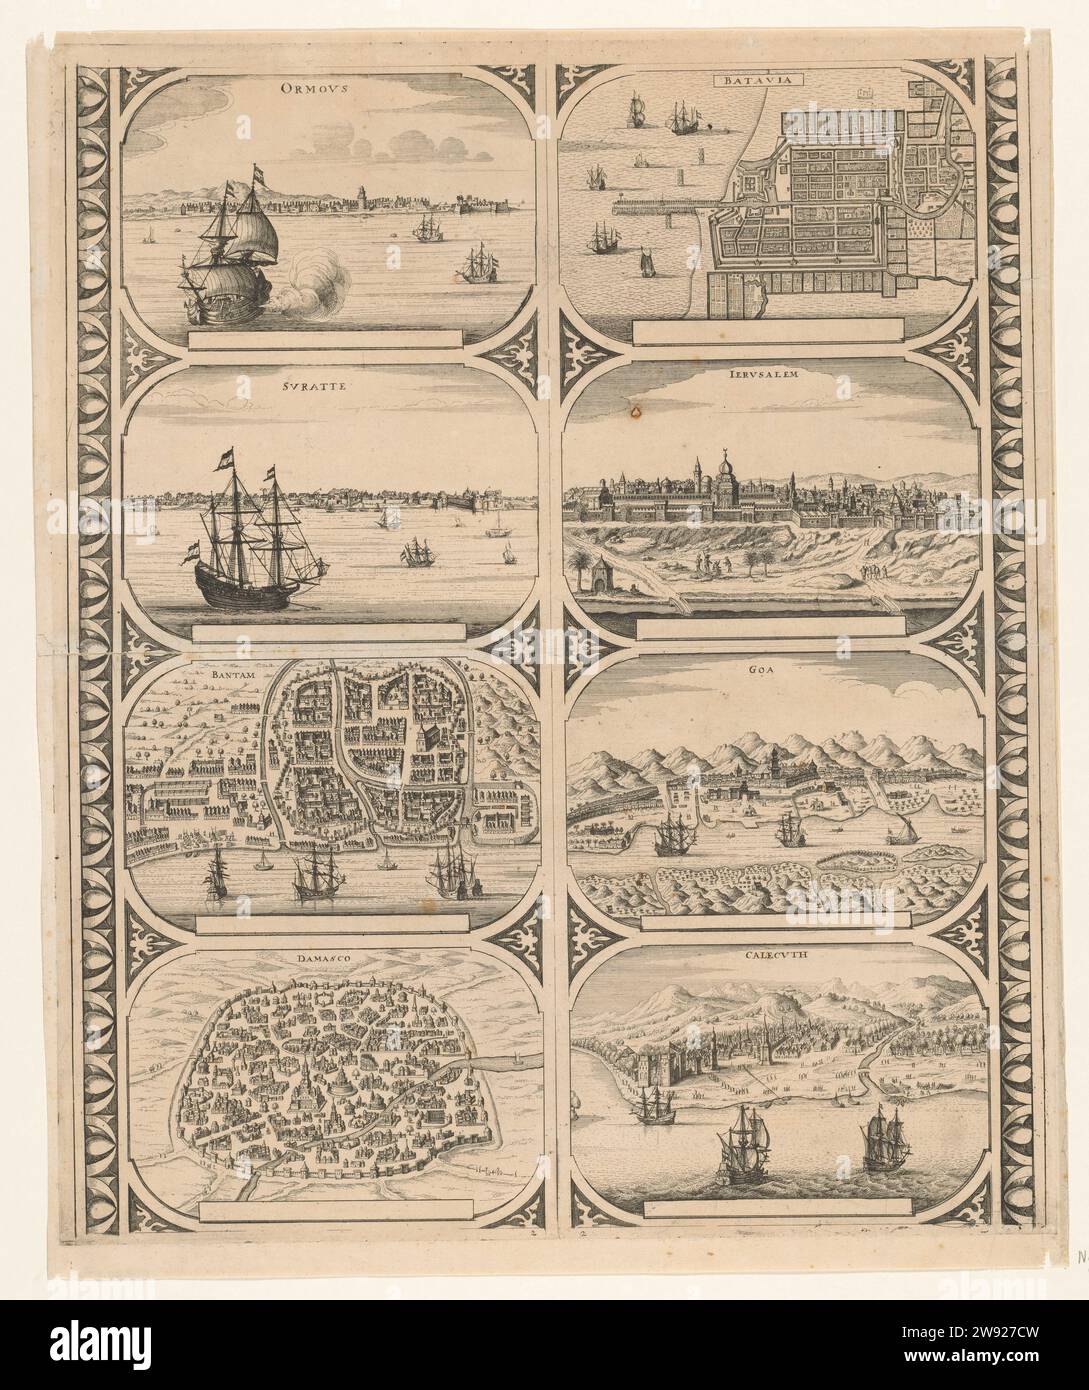 Ormovs / Svrattte / Bantam / Damasco / Batavia / Iervsalem / Goa / Calecvth, anonymous, 1670 - 1672 print Leaf with two vertical strips each with four faces on the cities in Asia: Hormoz, Suratte, Bantam, Damascus, Batavia, Jerusalem, Goa and Calcutta. Uncuted leaf with eight edge figures intended to stick in strips as a frame to stick a map of a continent. Amsterdam paper etching maps of cities. prospect of city, town panorama, silhouette of city Hormoz, Jazih-YE. A picture. My bandam. Damscus. Battery. Woundower. Goa. Colocking Stock Photo